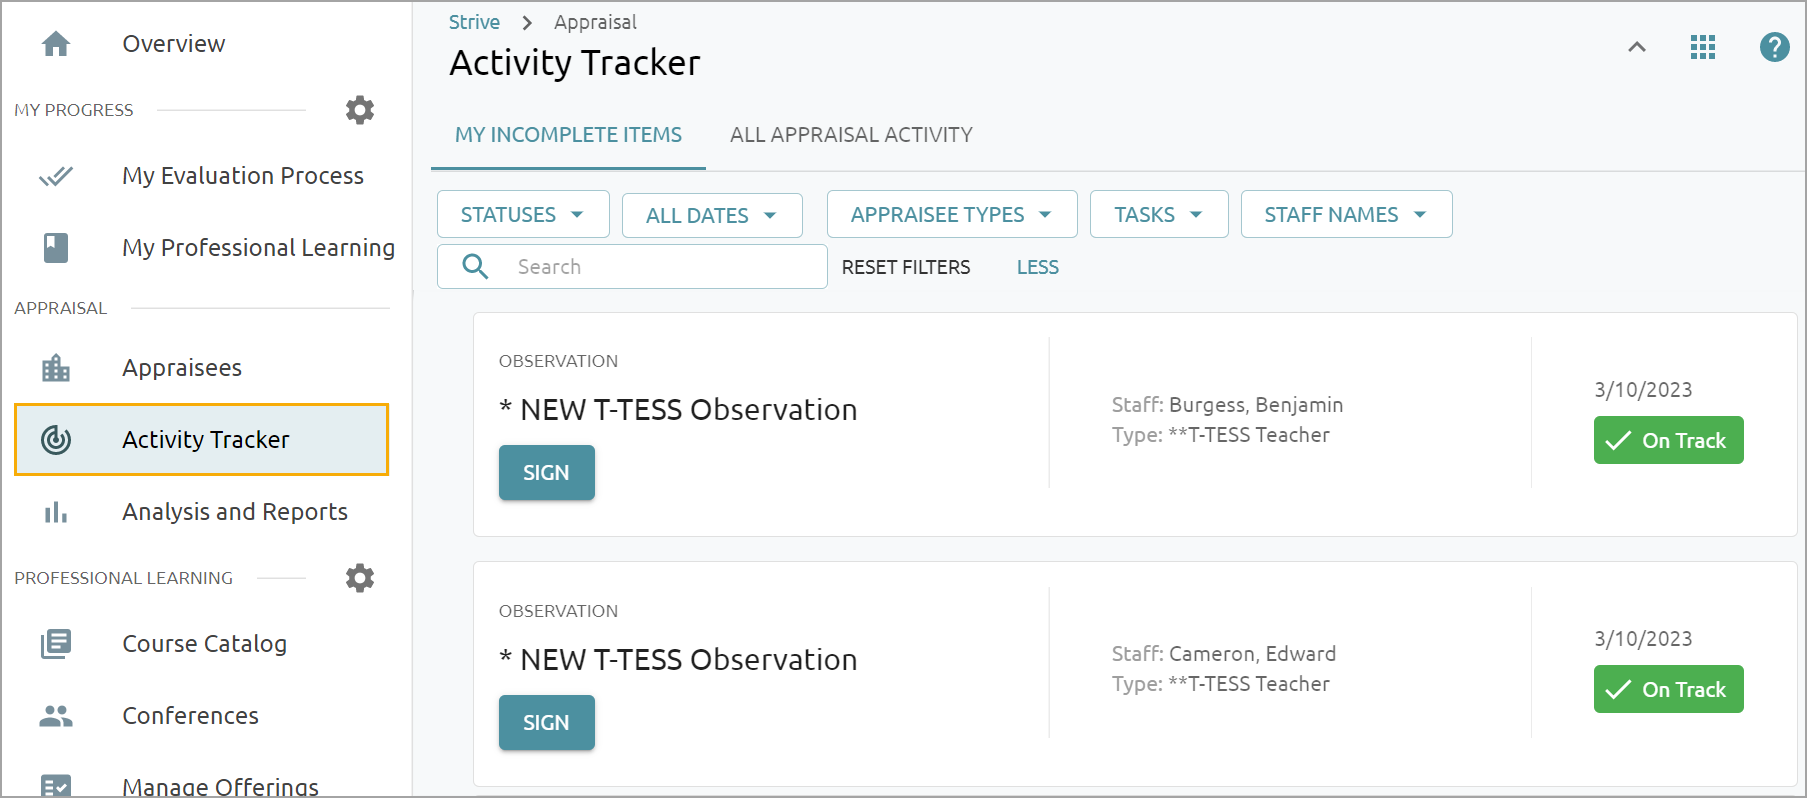 Activity_Tracker_Overview.png